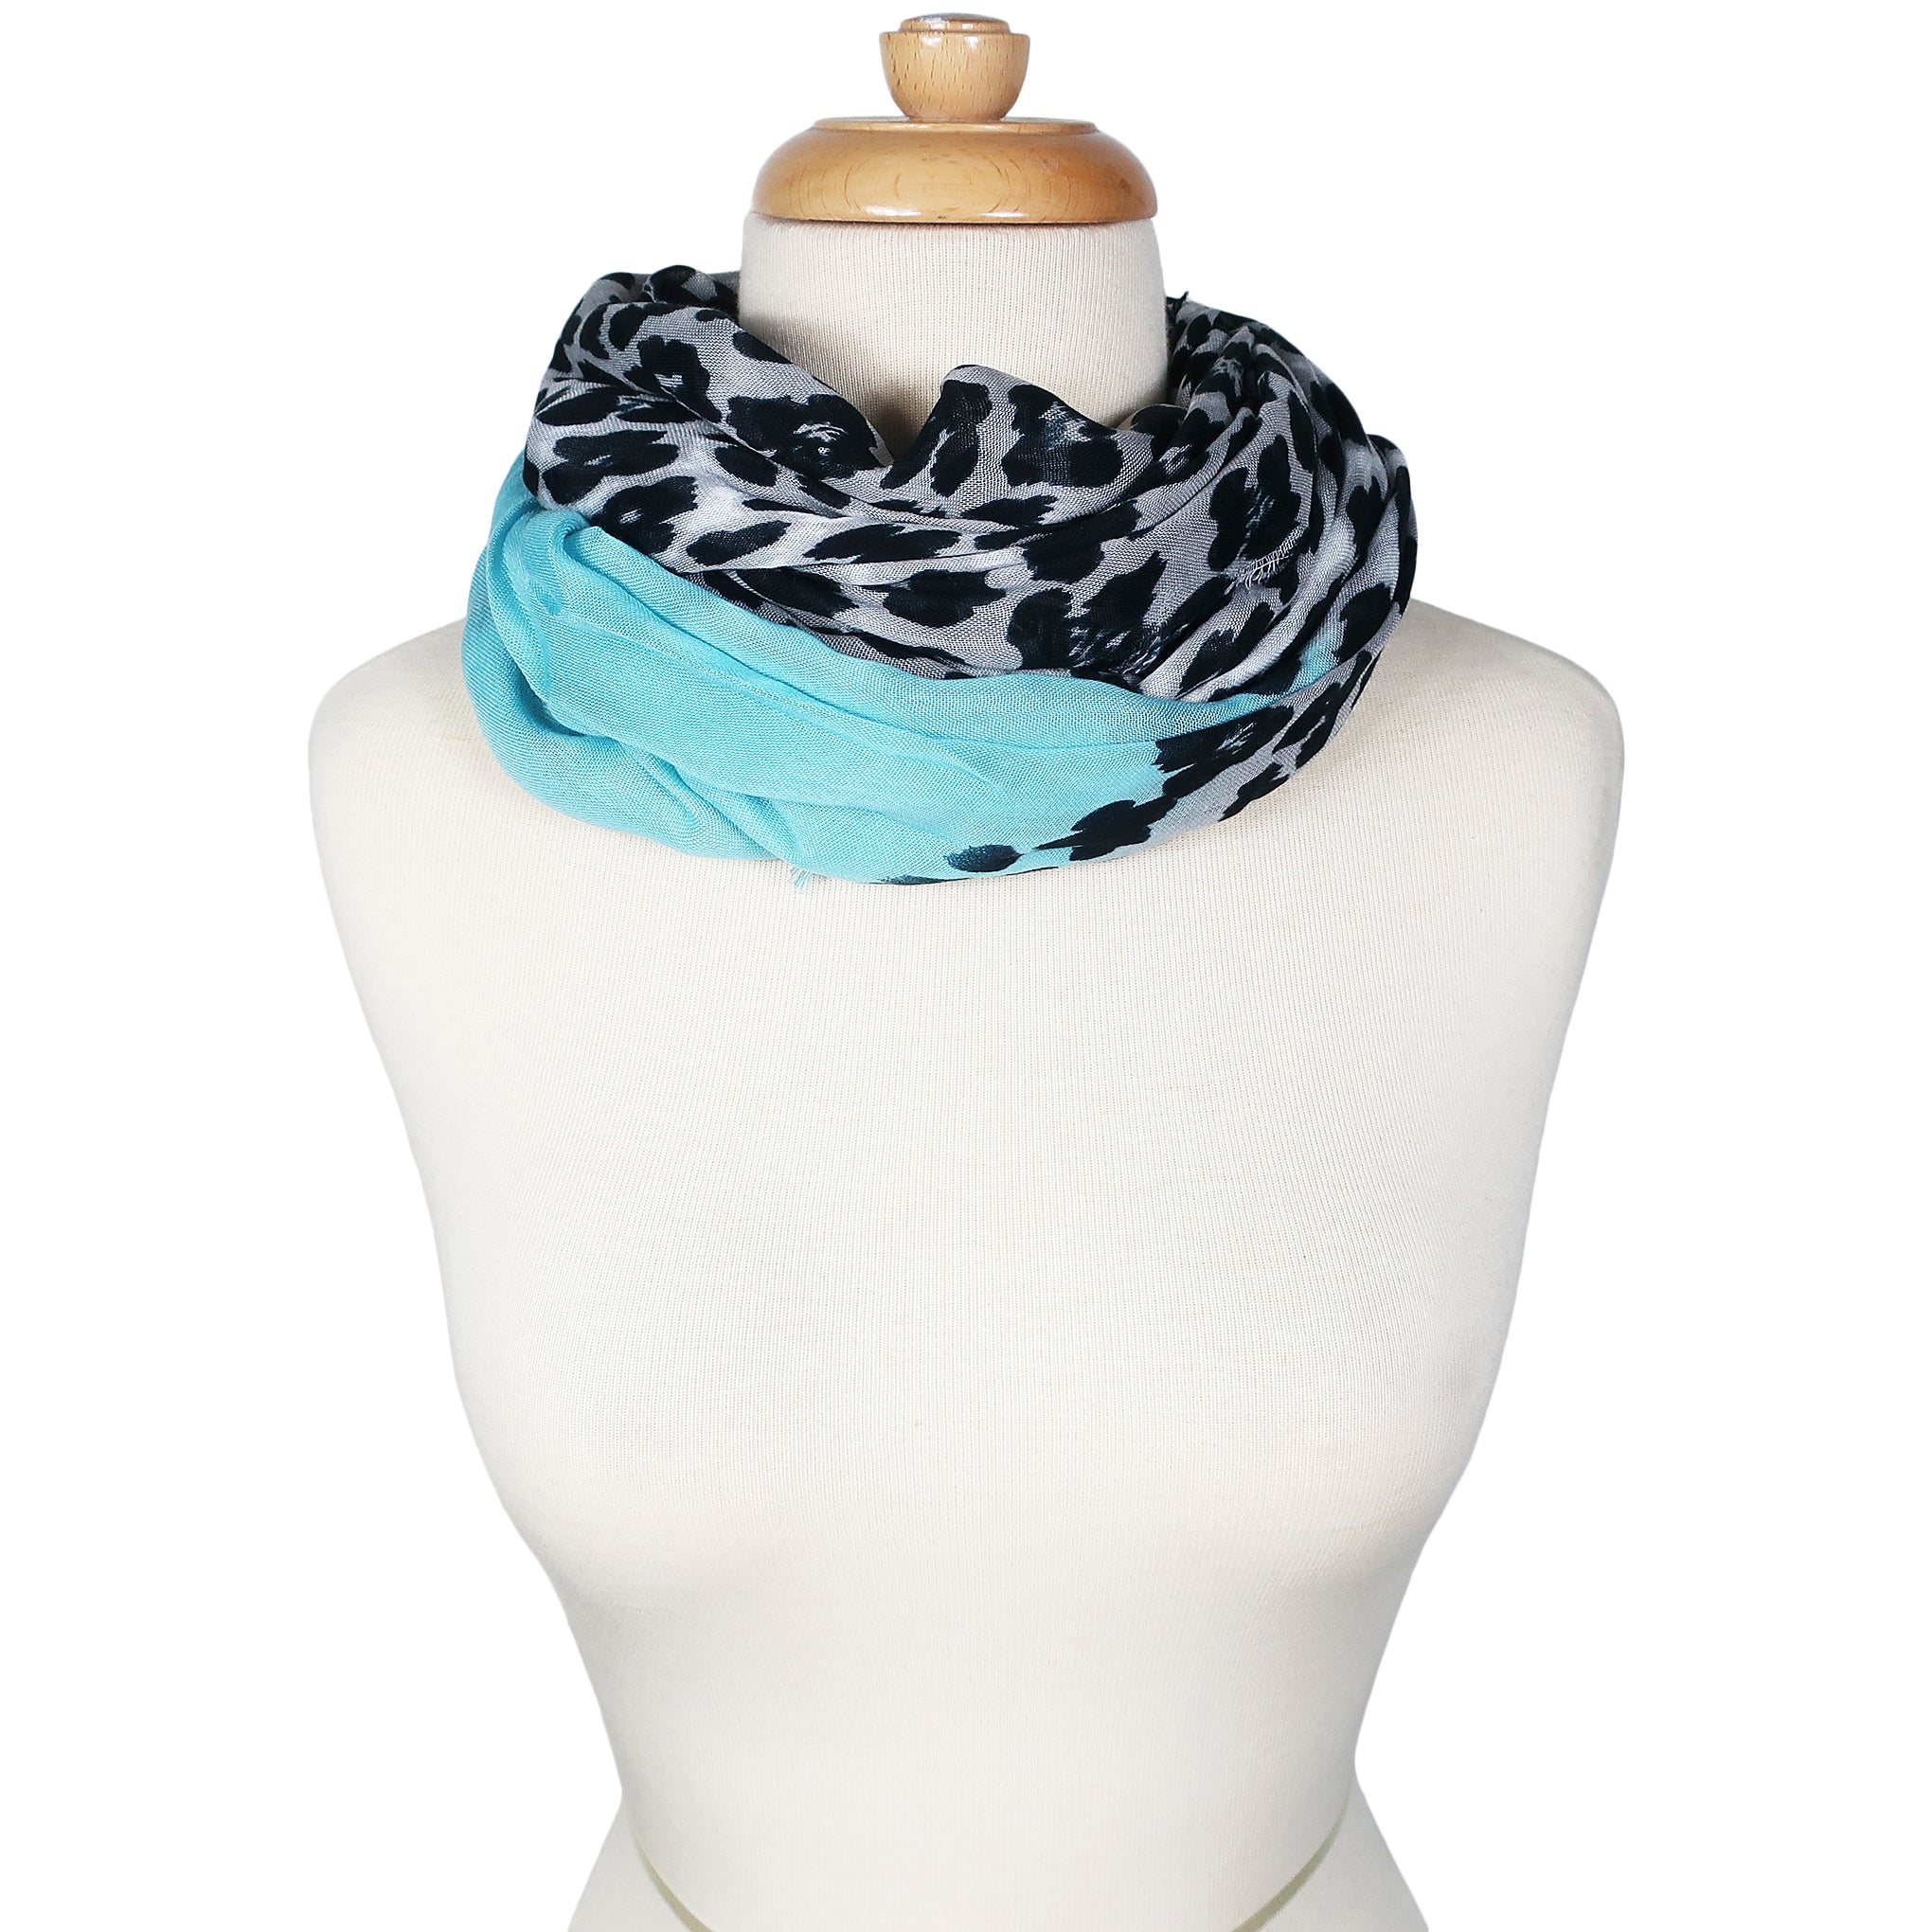 Blue Pacific Animal Print Cashmere Silk Scarf in Aqua Blue and Snow 78 x 22